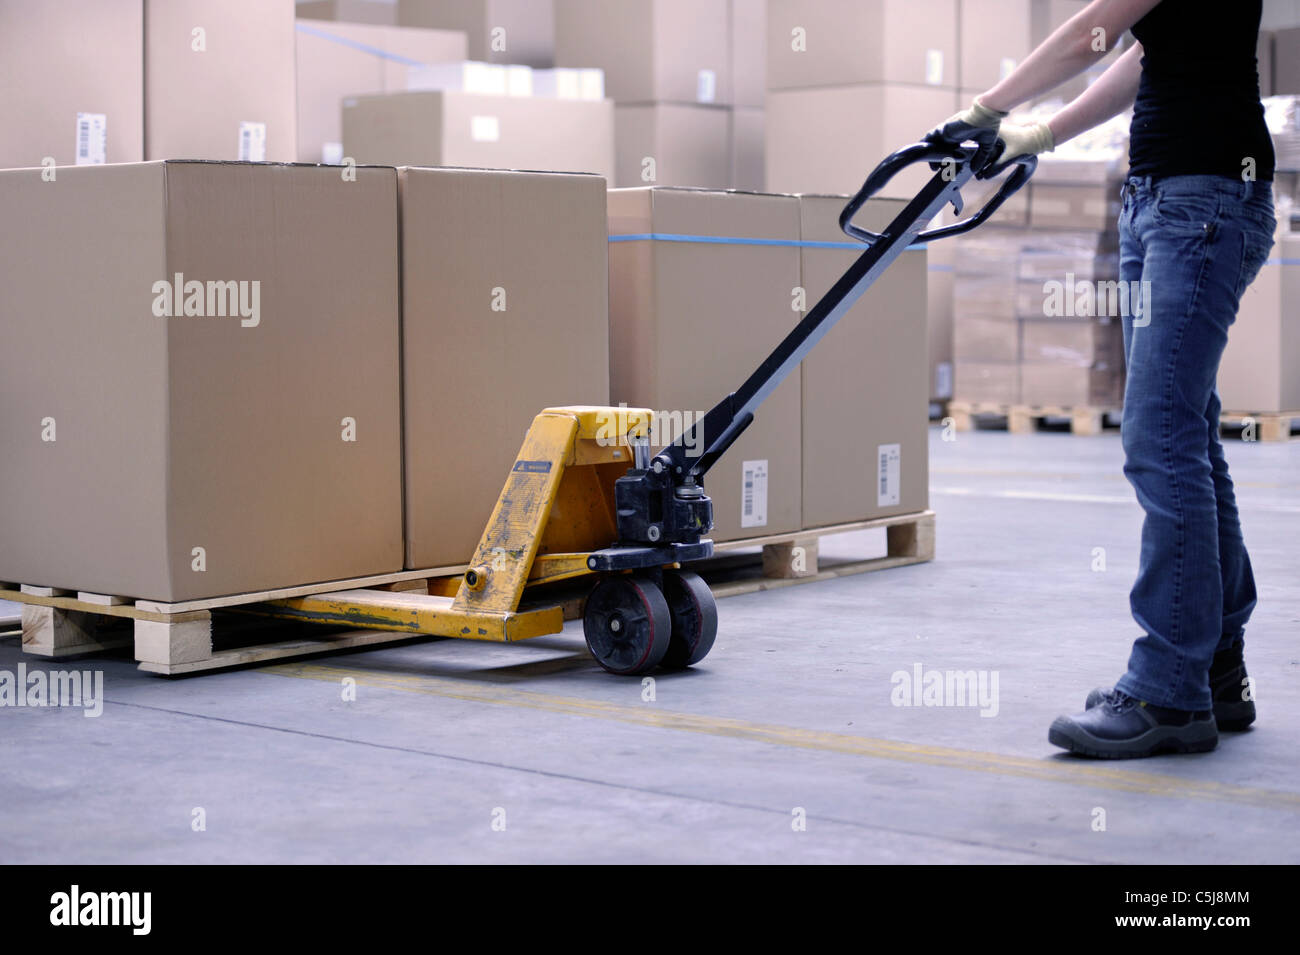 carton boxes being lifted with forklift Stock Photo